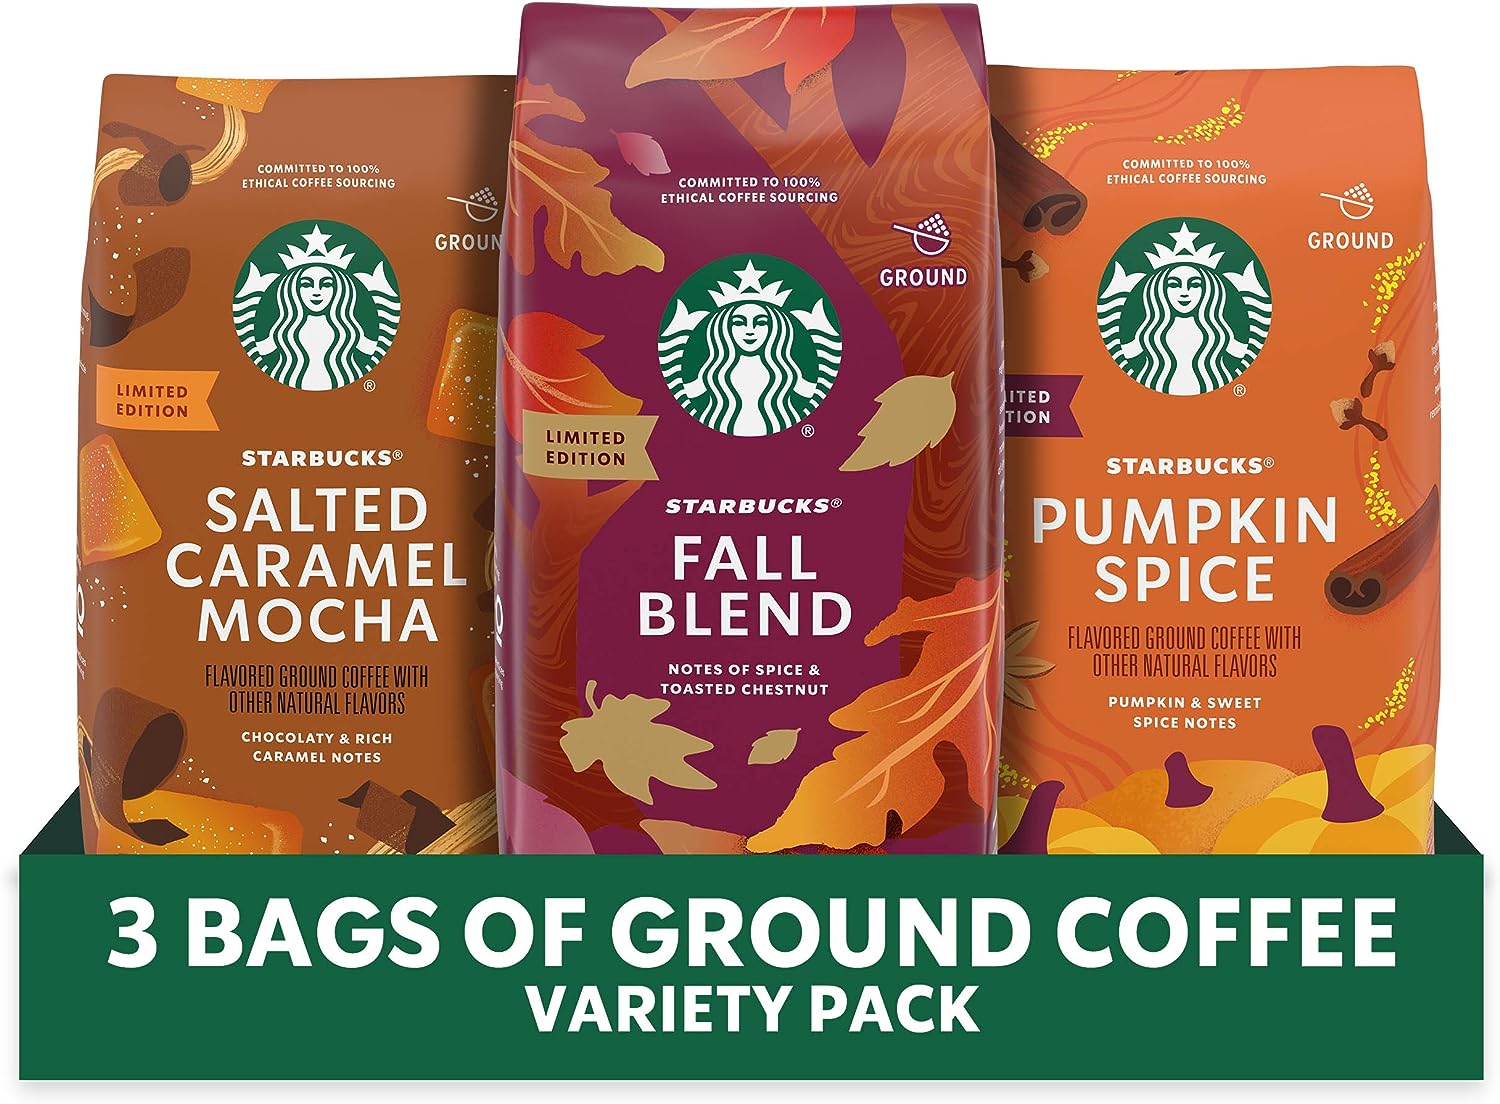 Starbucks Ground Coffee Fall Bundle, Medium Roast and Naturally Flavored Coffee, 100% Arabica, Limited Edition, 3 Bags (32 Oz Total)